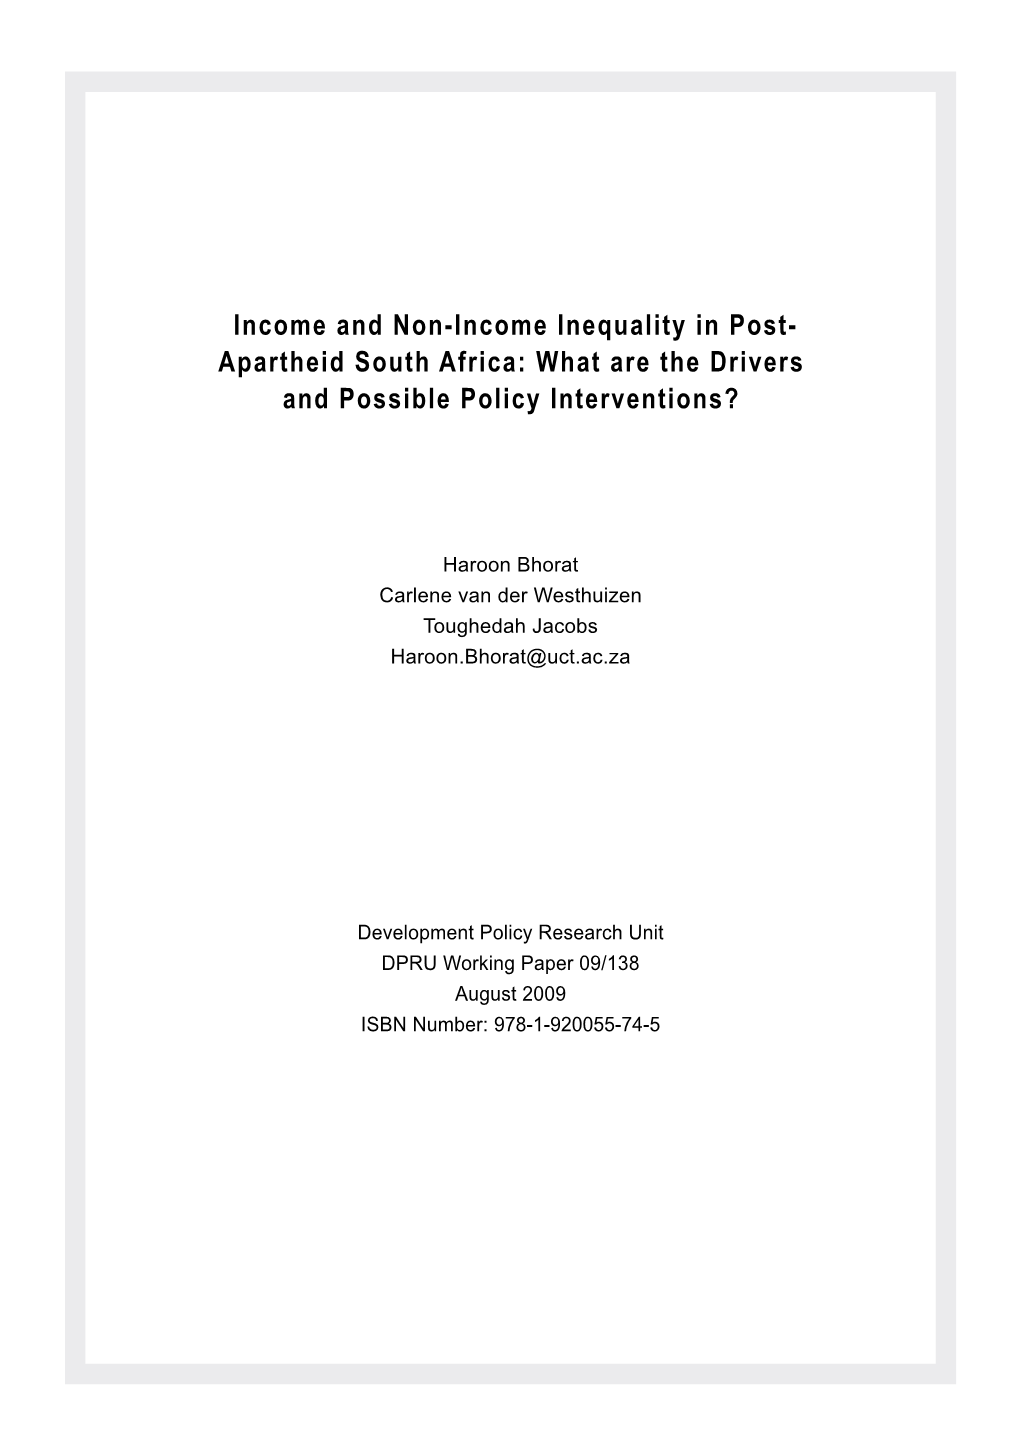 Income and Non-Income Inequality in Post- Apartheid South Africa: What Are the Drivers and Possible Policy Interventions?